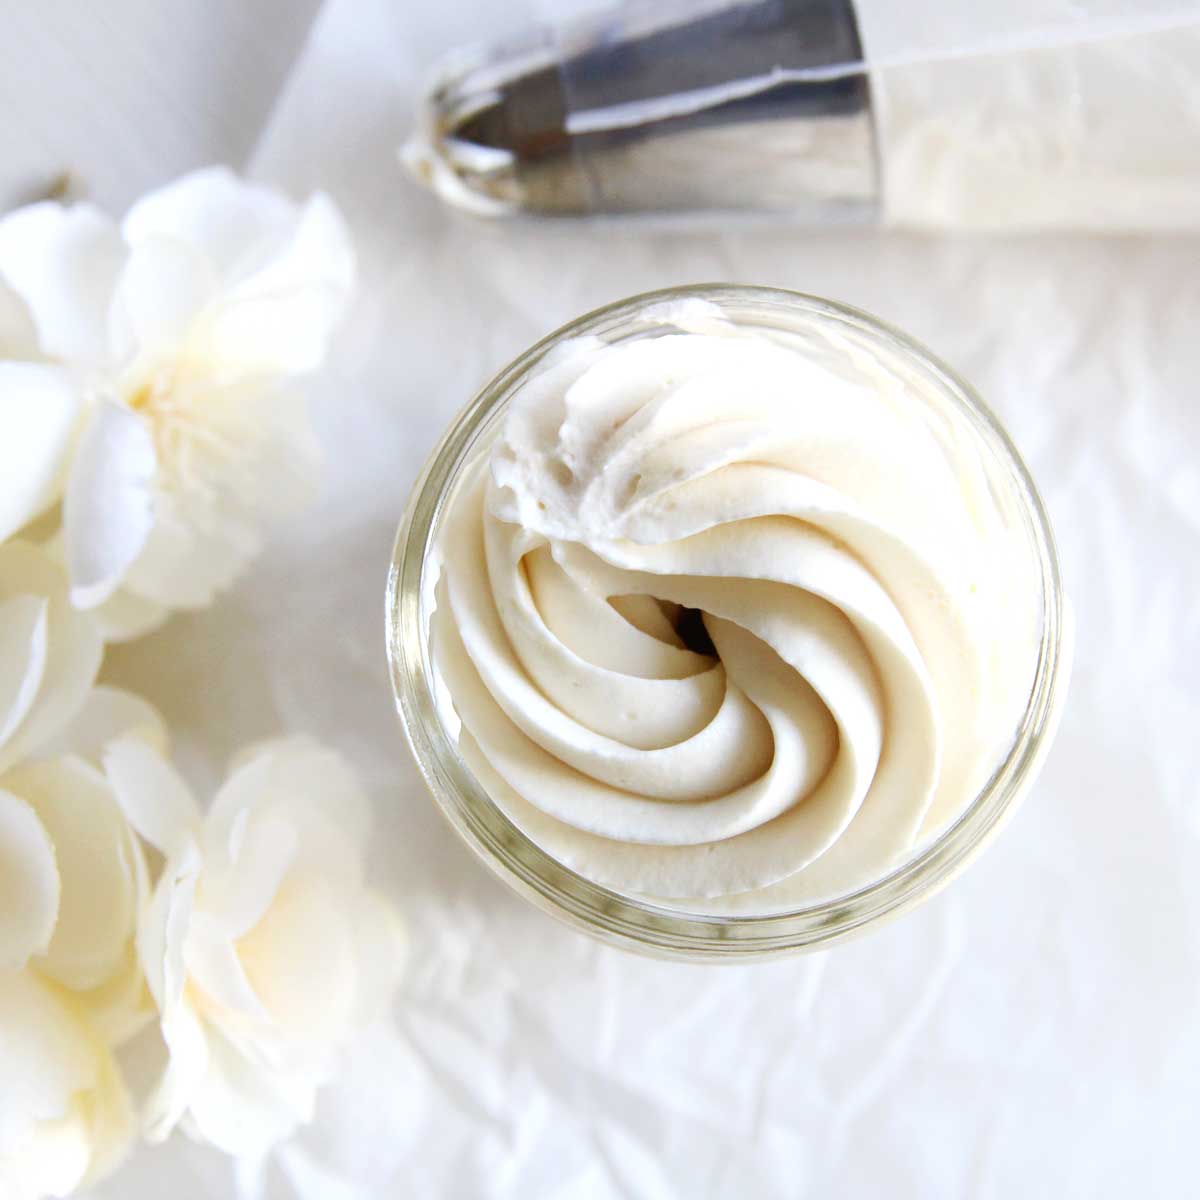 How to Make the Best Ever Whipped Cream with Sweetened Condensed Milk - Whipped Cream Recipes